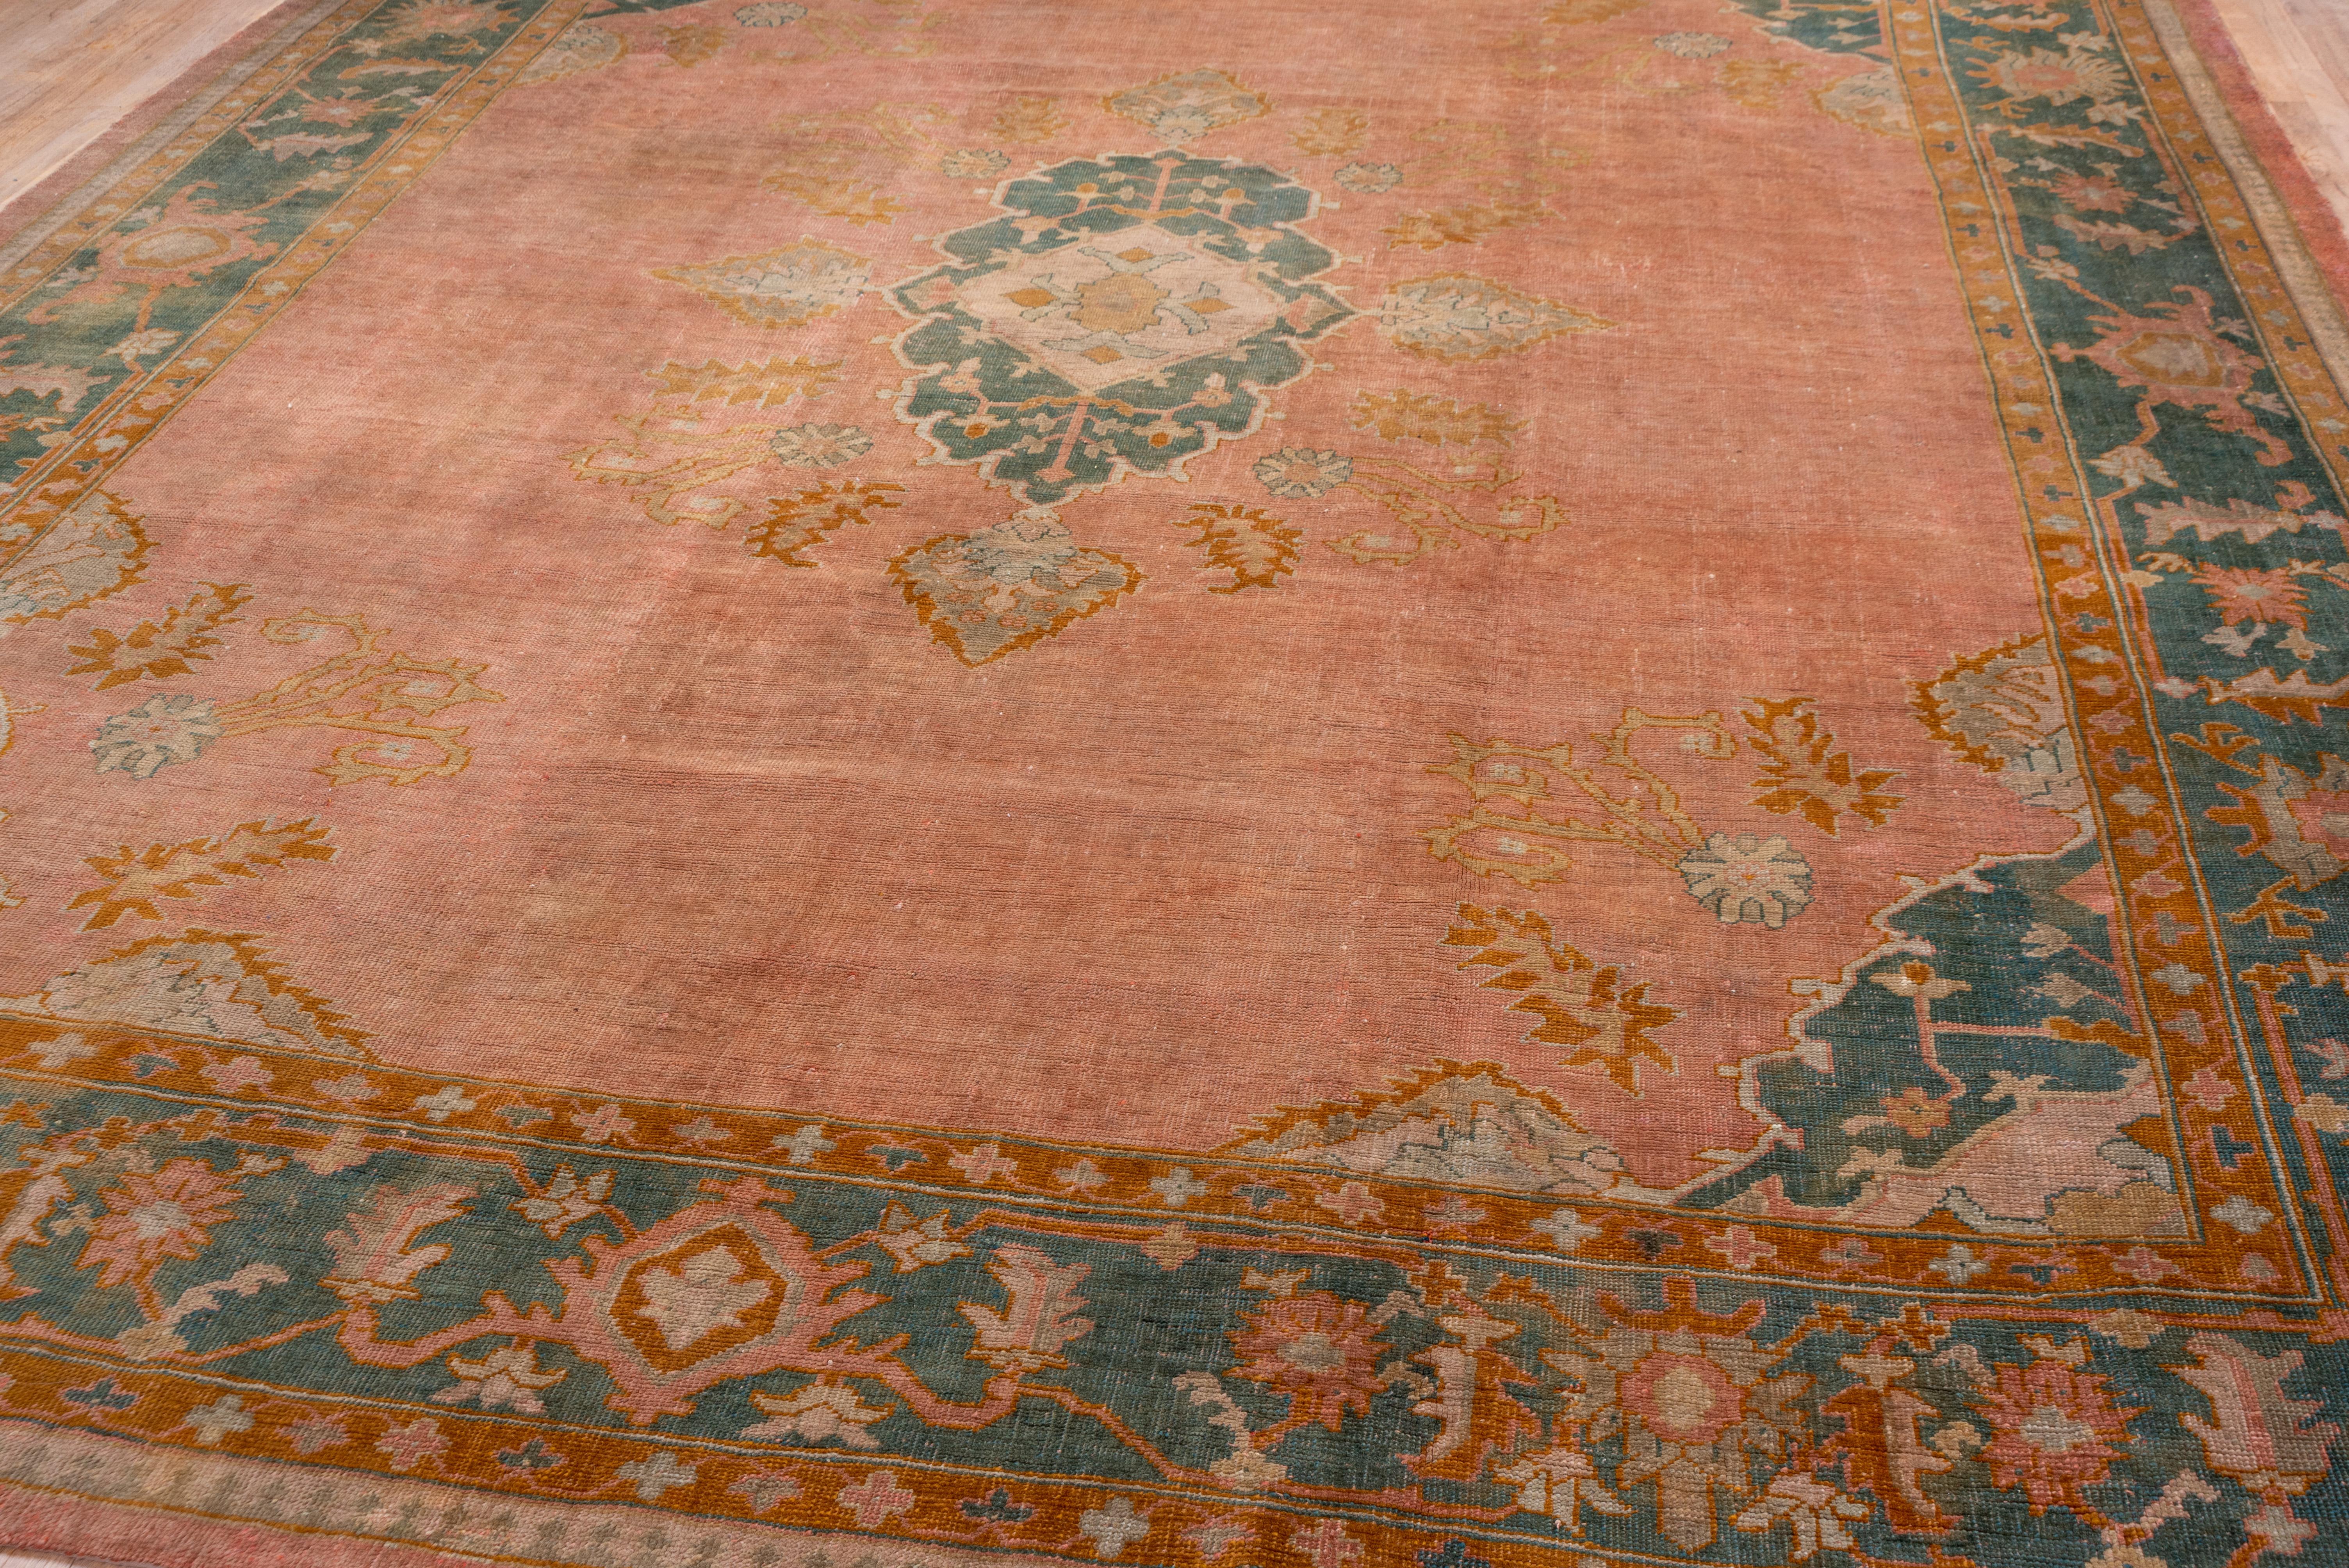 1910s Antique Turkish Oushak Rug, Pink FIeld, Dark Green & Orange Borders In Good Condition For Sale In New York, NY